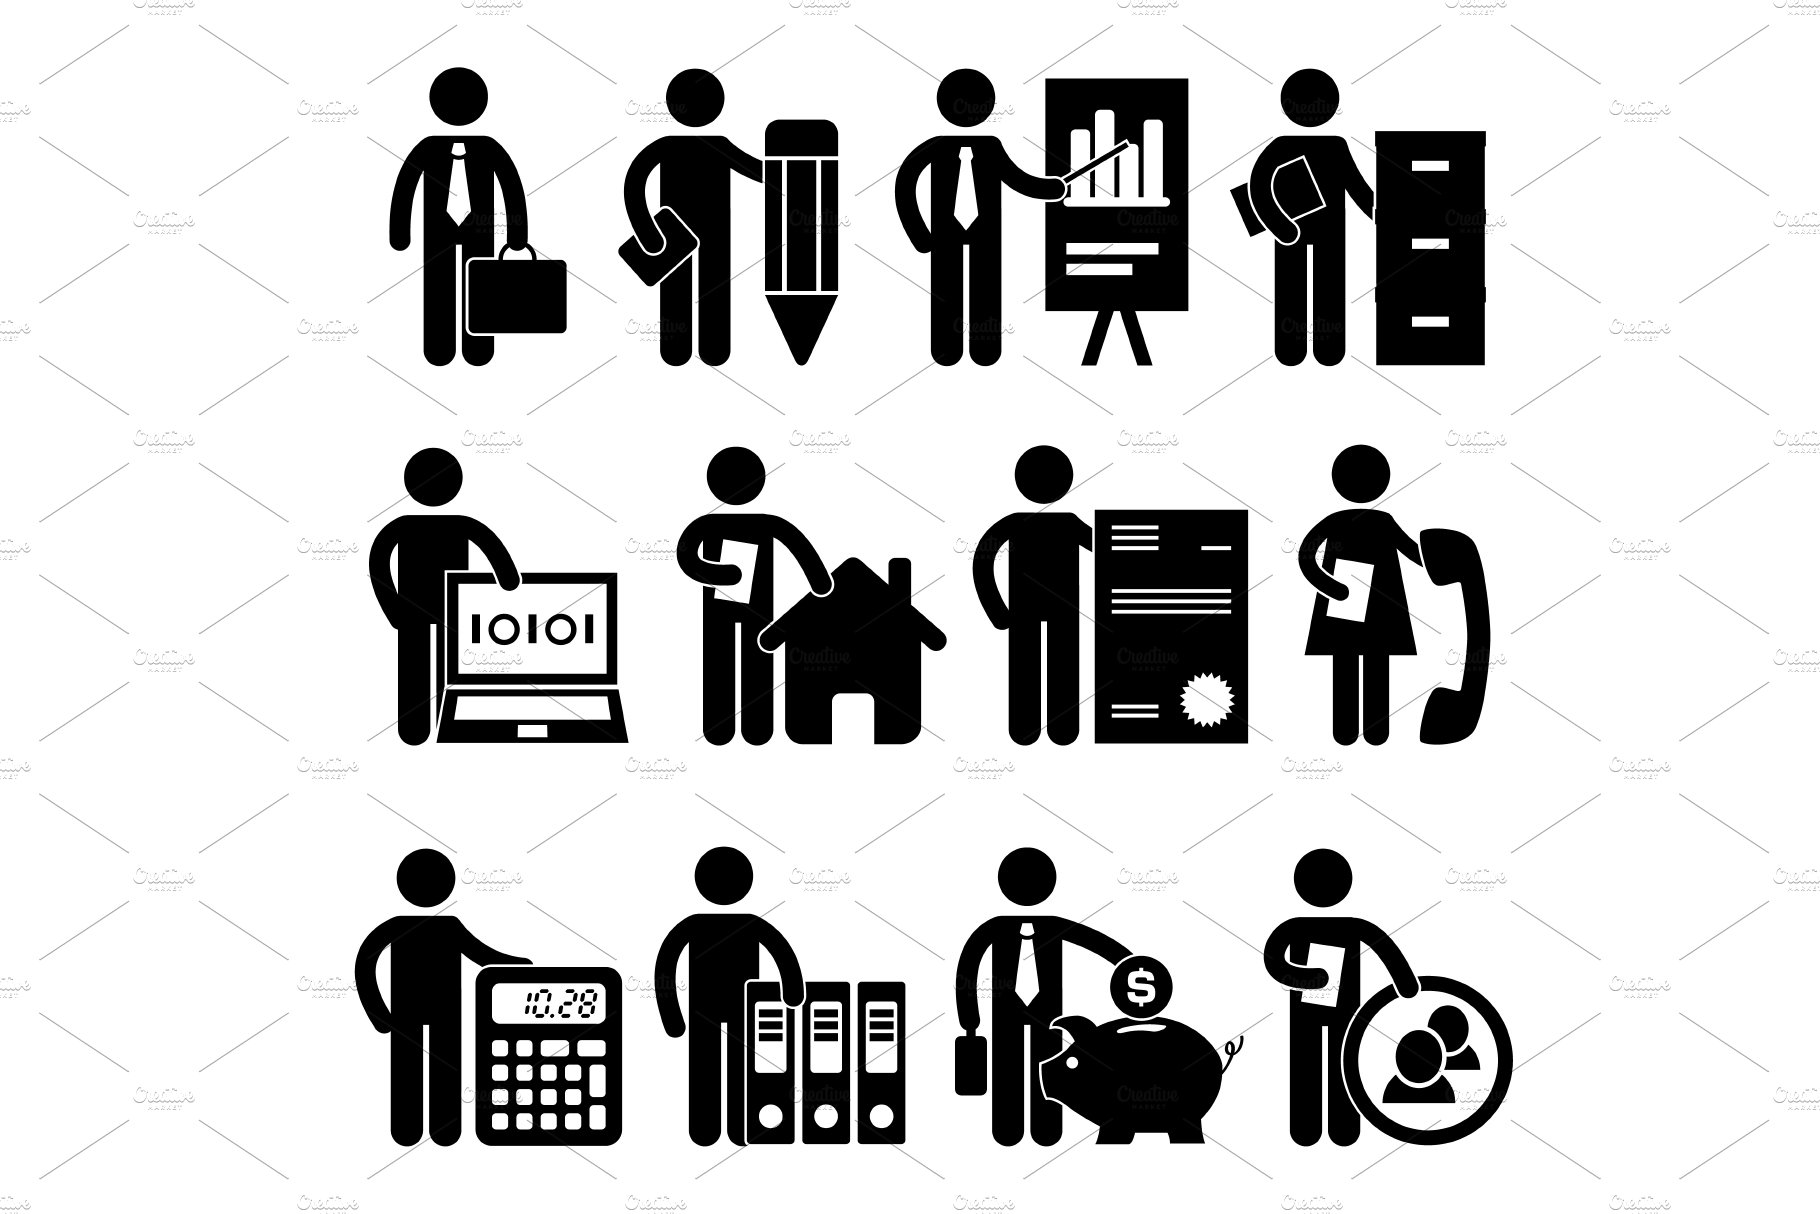 Office Jobs Employee Worker Icons cover image.